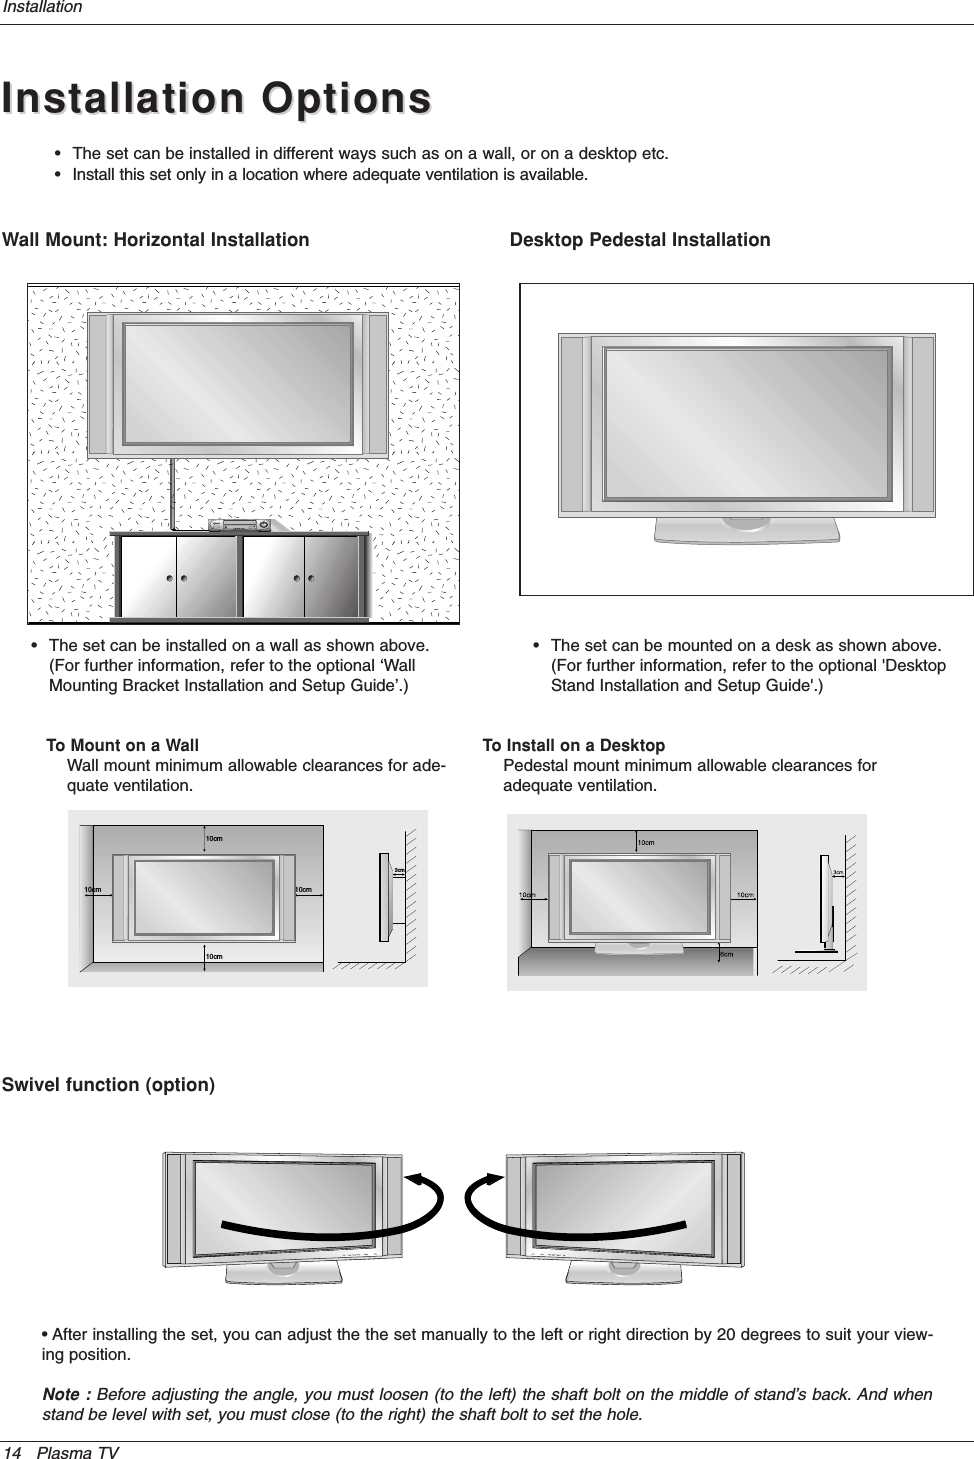 14 Plasma TVInstallationInstallation OptionsInstallation OptionsDesktop Pedestal Installation•The set can be mounted on a desk as shown above.(For further information, refer to the optional &apos;DesktopStand Installation and Setup Guide&apos;.)•The set can be installed in different ways such as on a wall, or on a desktop etc.•Install this set only in a location where adequate ventilation is available.Wall Mount: Horizontal Installation•The set can be installed on a wall as shown above.(For further information, refer to the optional ‘WallMounting Bracket Installation and Setup Guide’.)Swivel function (option)• After installing the set, you can adjust the the set manually to the left or right direction by 20 degrees to suit your view-ing position.Note : Before adjusting the angle, you must loosen (to the left) the shaft bolt on the middle of stand’s back. And whenstand be level with set, you must close (to the right) the shaft bolt to set the hole.3cm10cm10cm10cm10cmTo Mount on a WallWall mount minimum allowable clearances for ade-quate ventilation.To Install on a DesktopPedestal mount minimum allowable clearances foradequate ventilation.